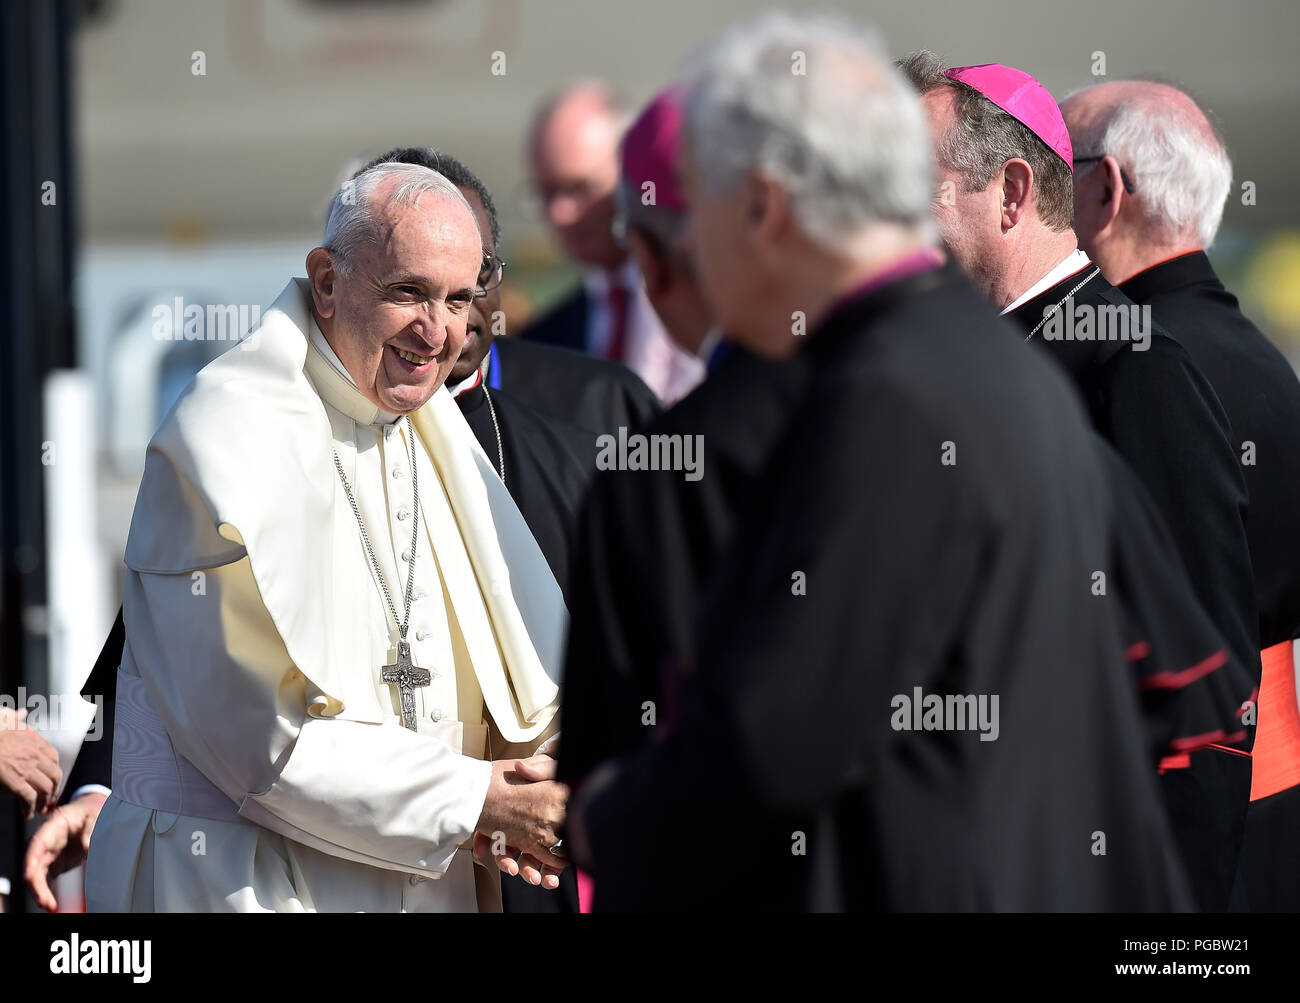 Pope Francis greets the clergy upon arrival as he arrives at Dublin Airport as he arrives at Dublin Airport as he arrives at Dublin International Airport, at the start of his visit to Ireland. Stock Photo